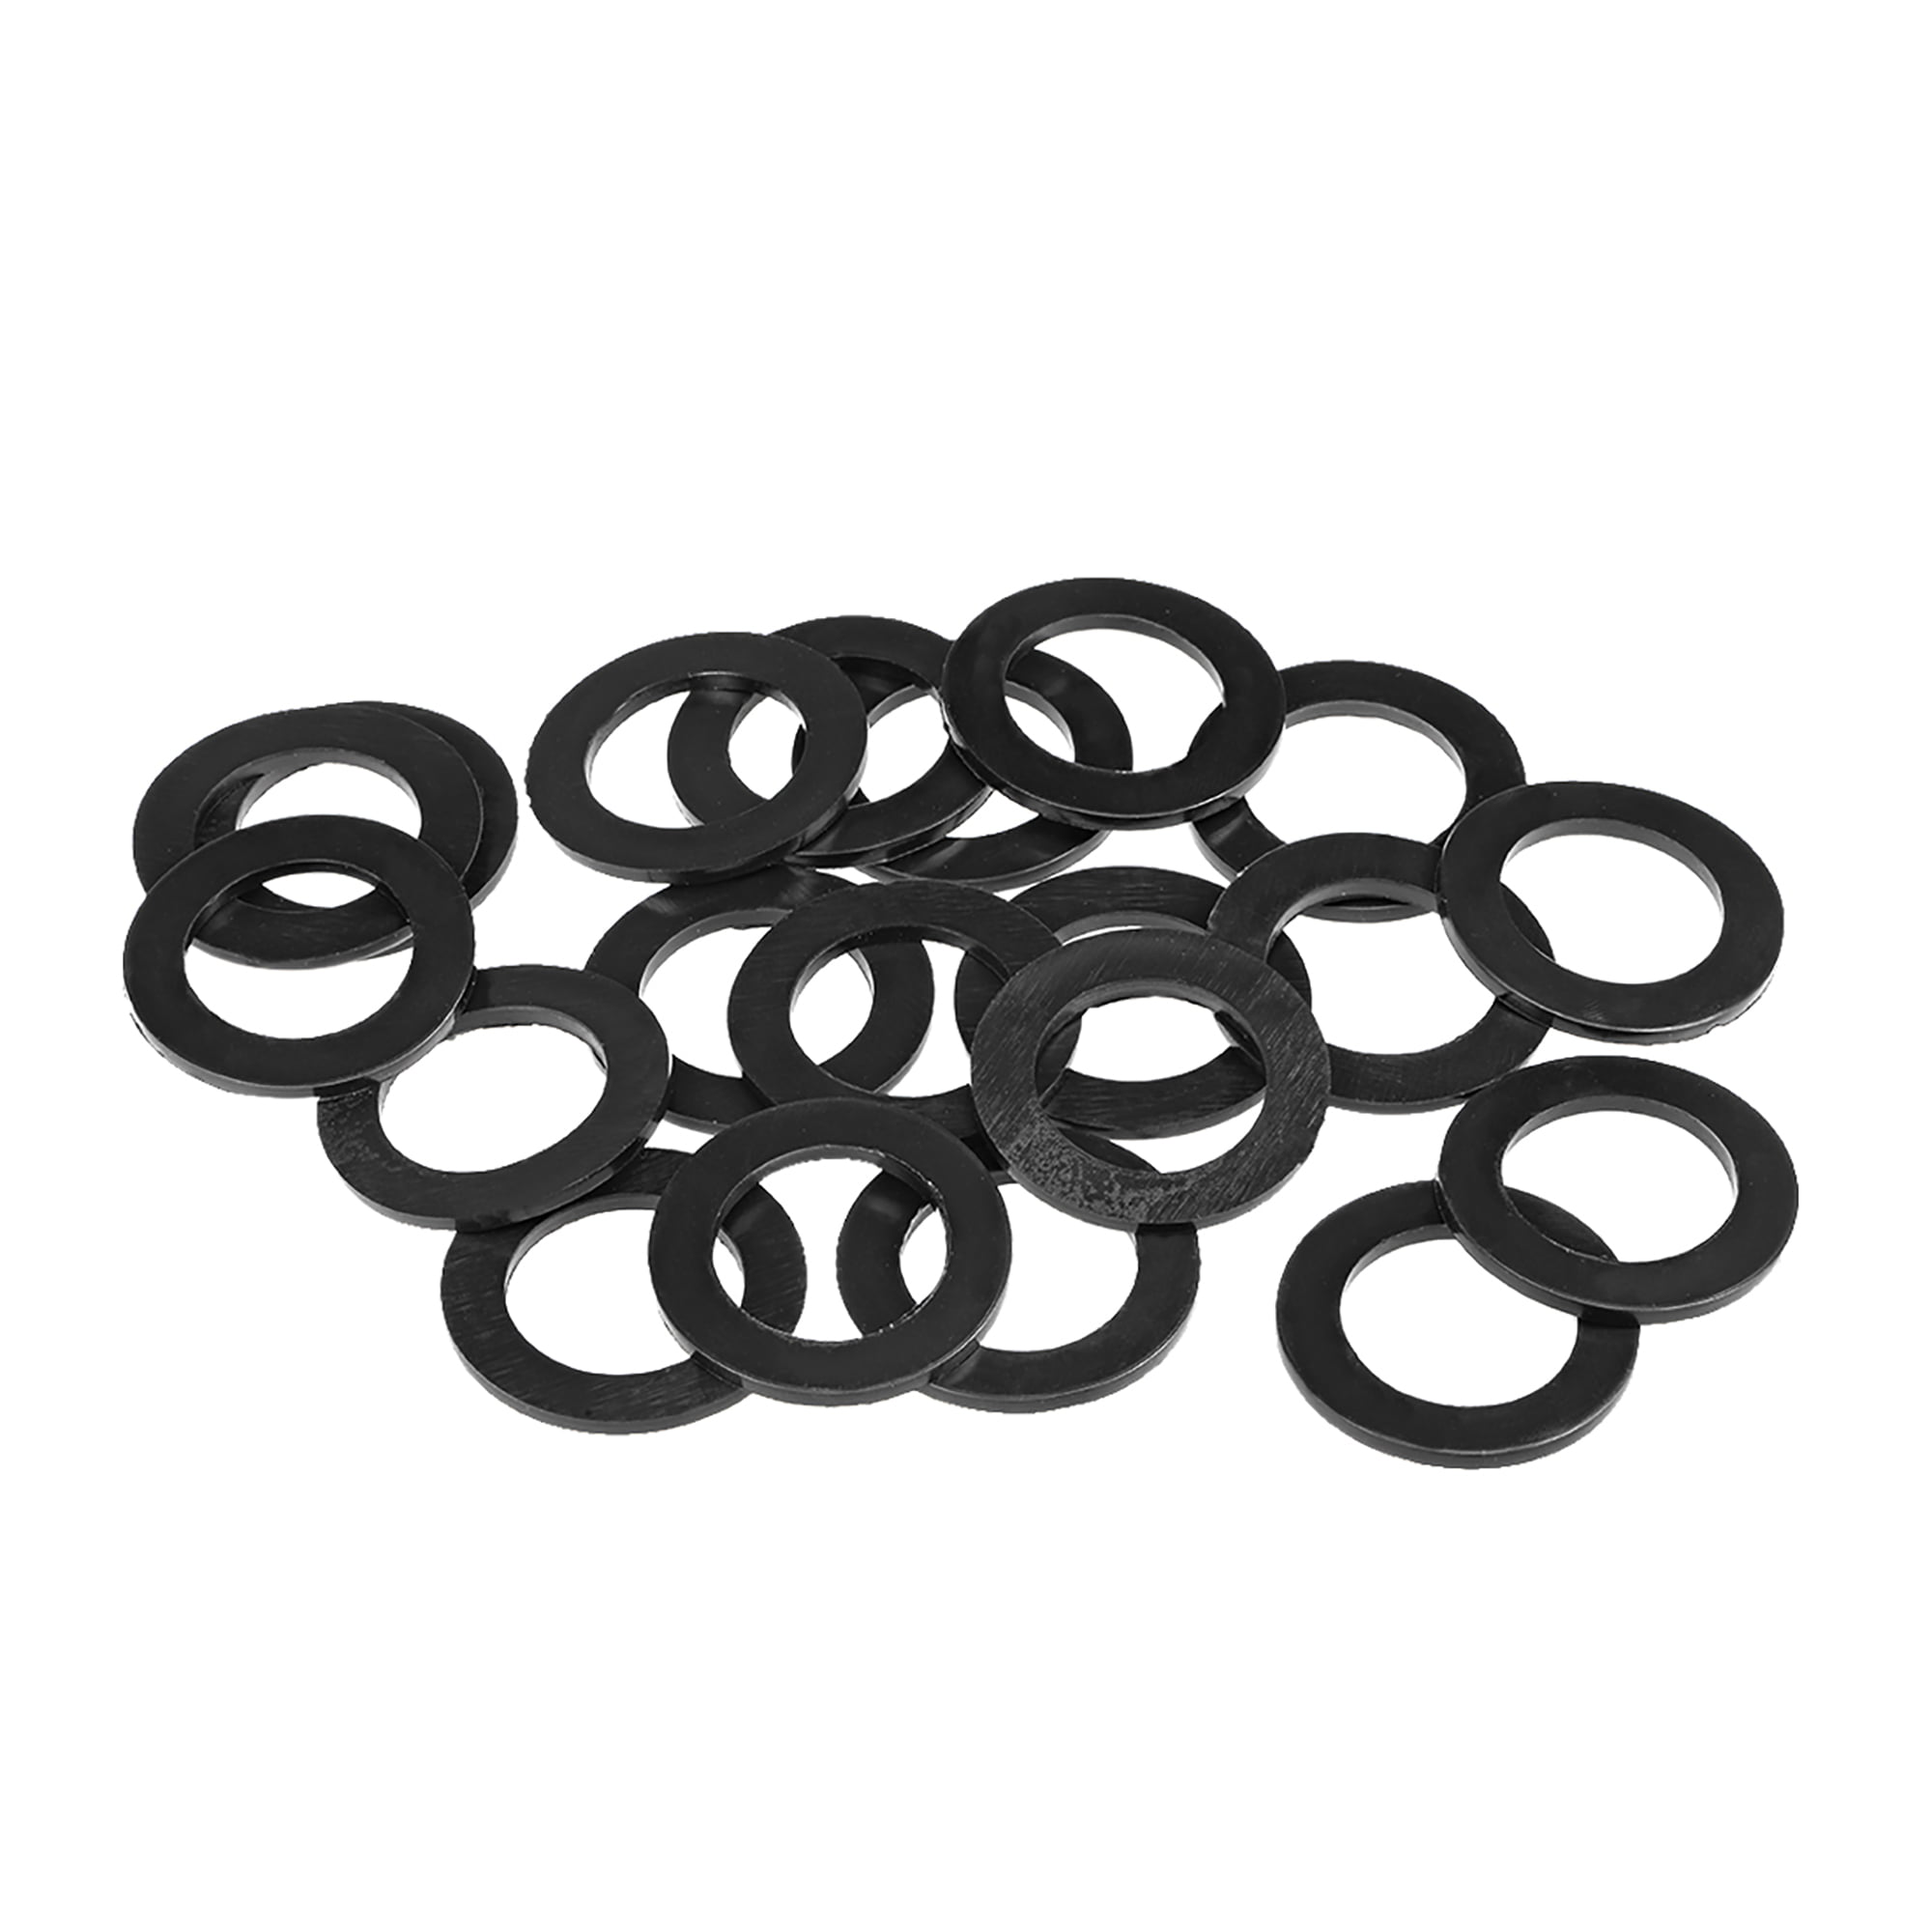 sourcing map 20Pcs 24mm x 1.5mm Rubber O-rings NBR Heat Resistant Sealing Ring Grommets Red